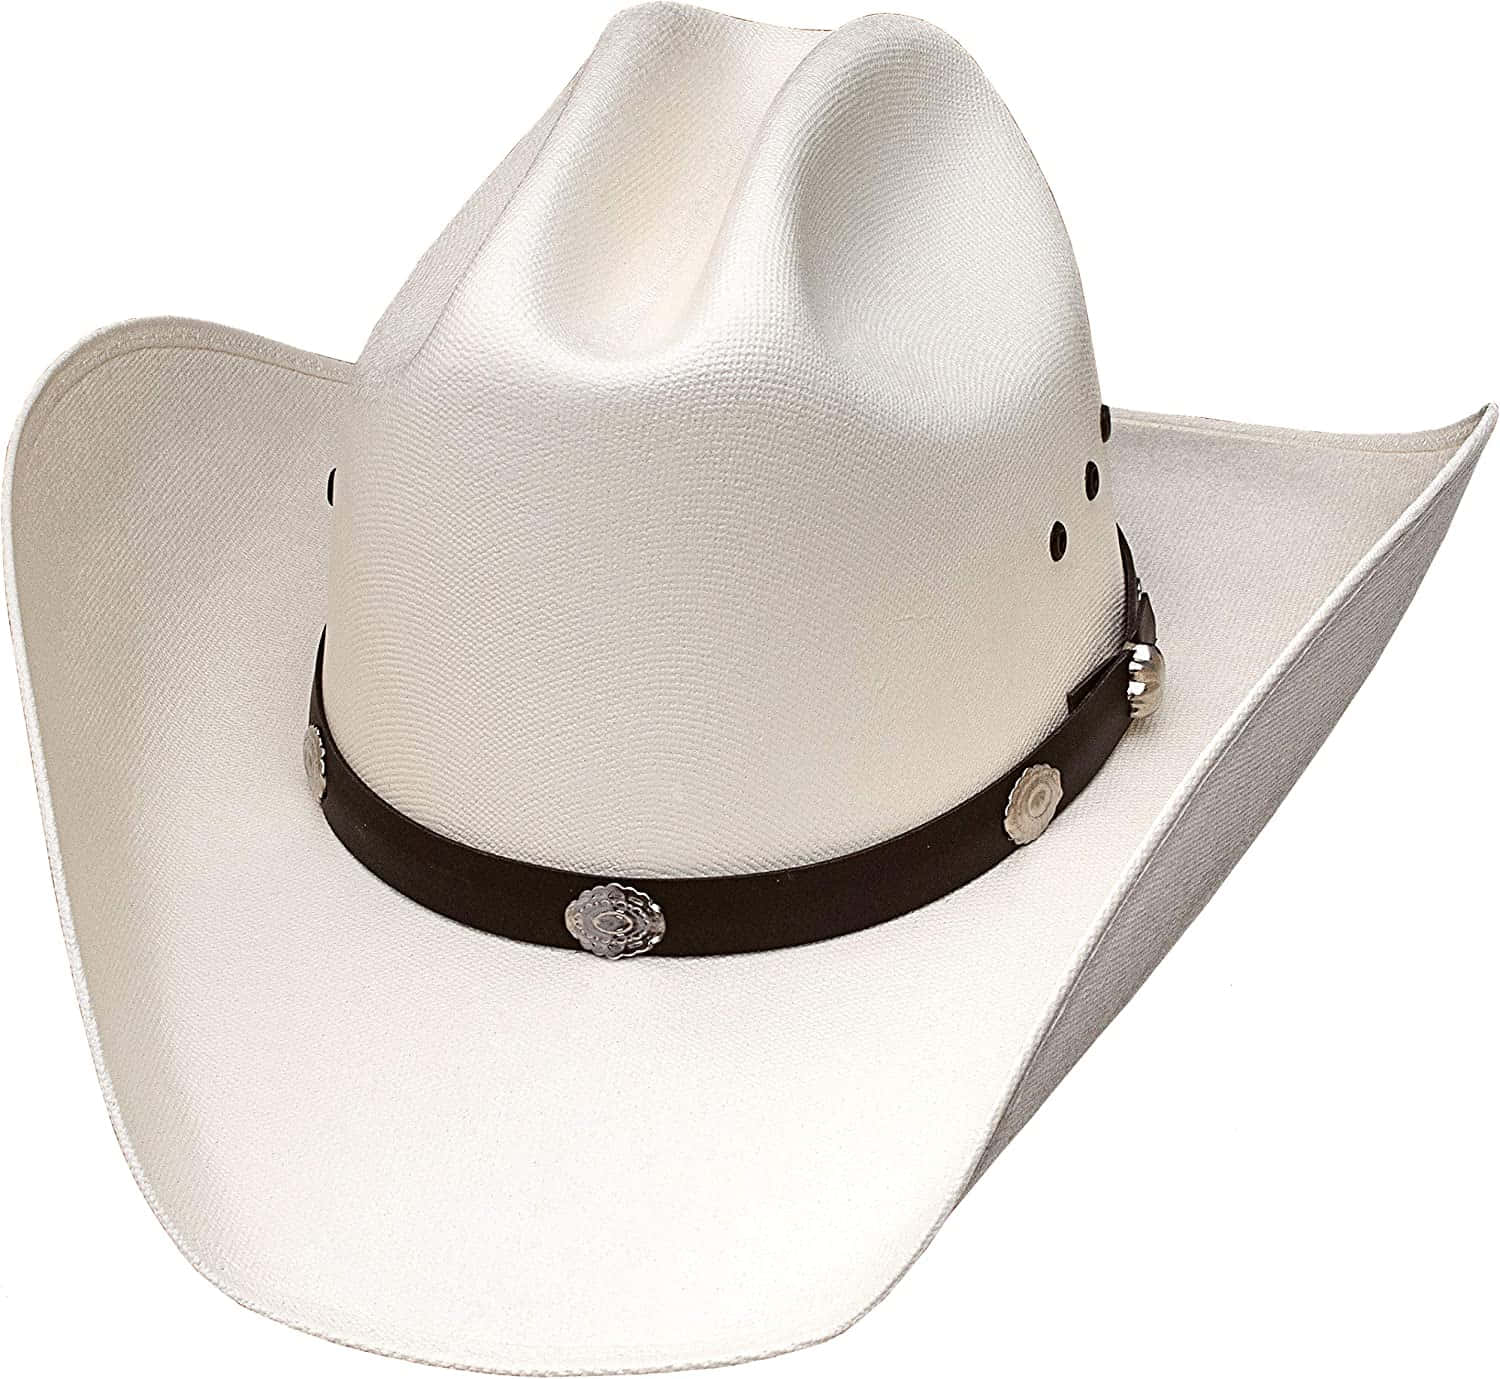 Add a Touch of Western Charm With Cowboy Hats